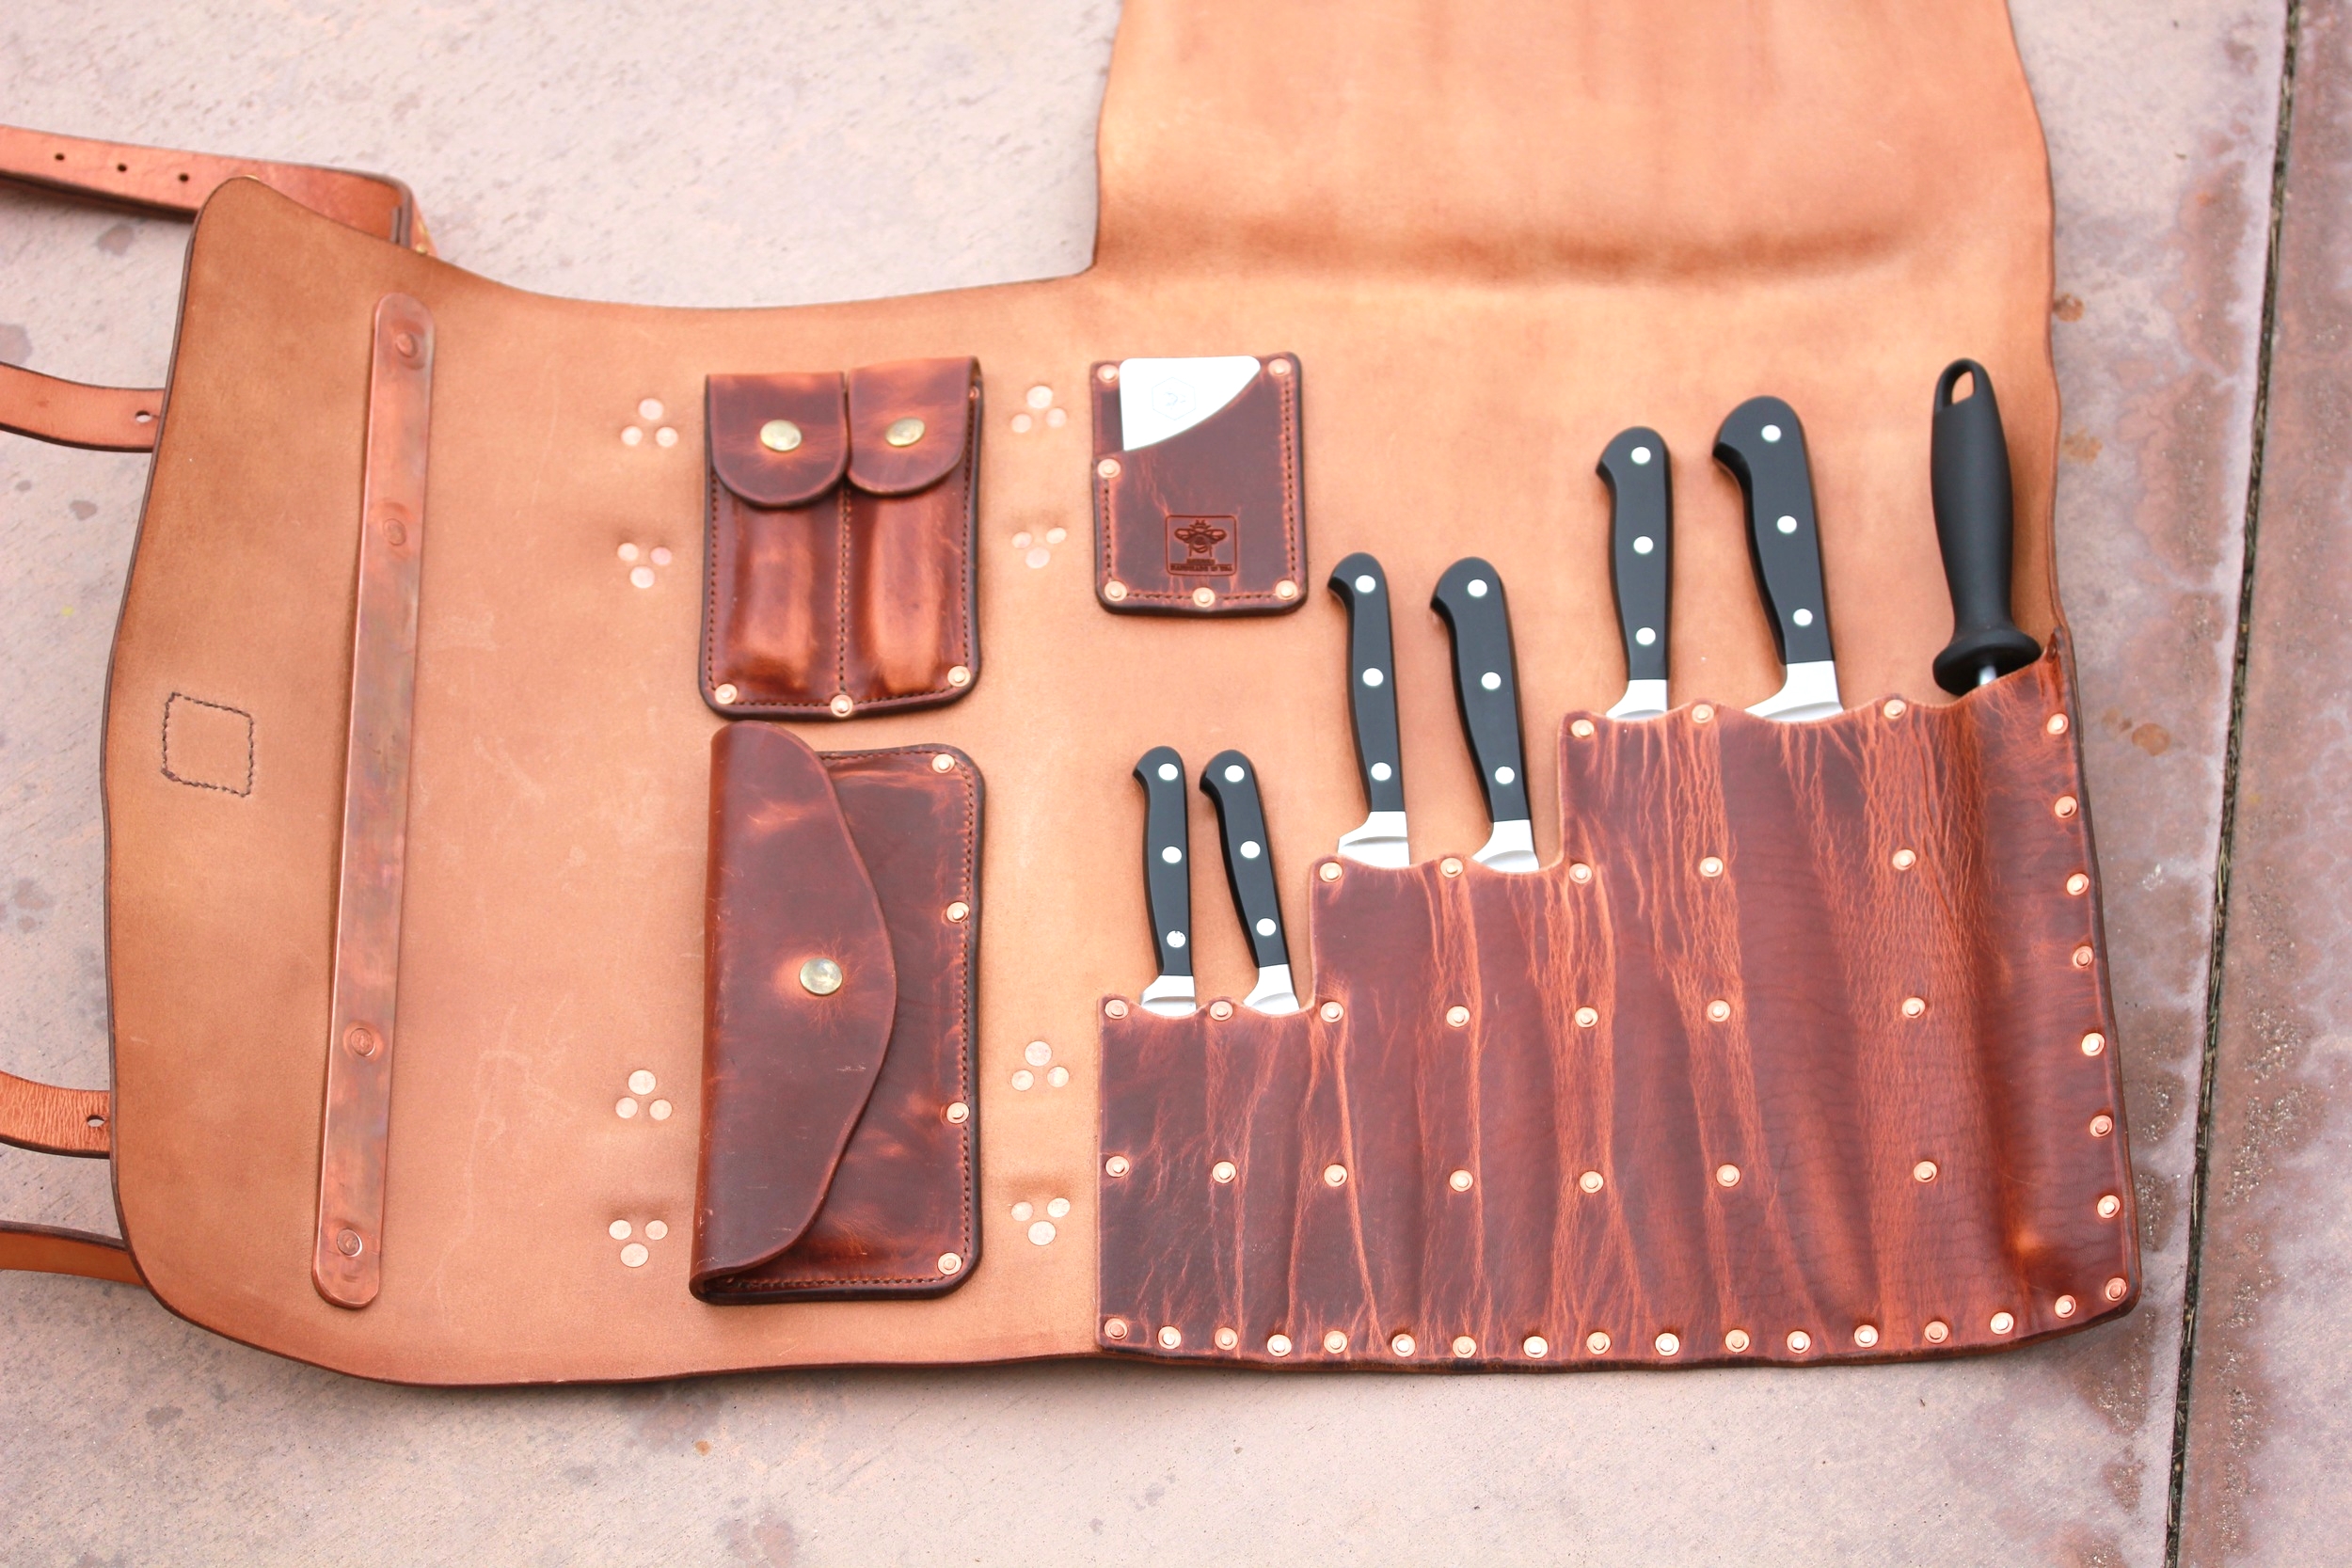 Leather knife roll bag - How to choose the best?